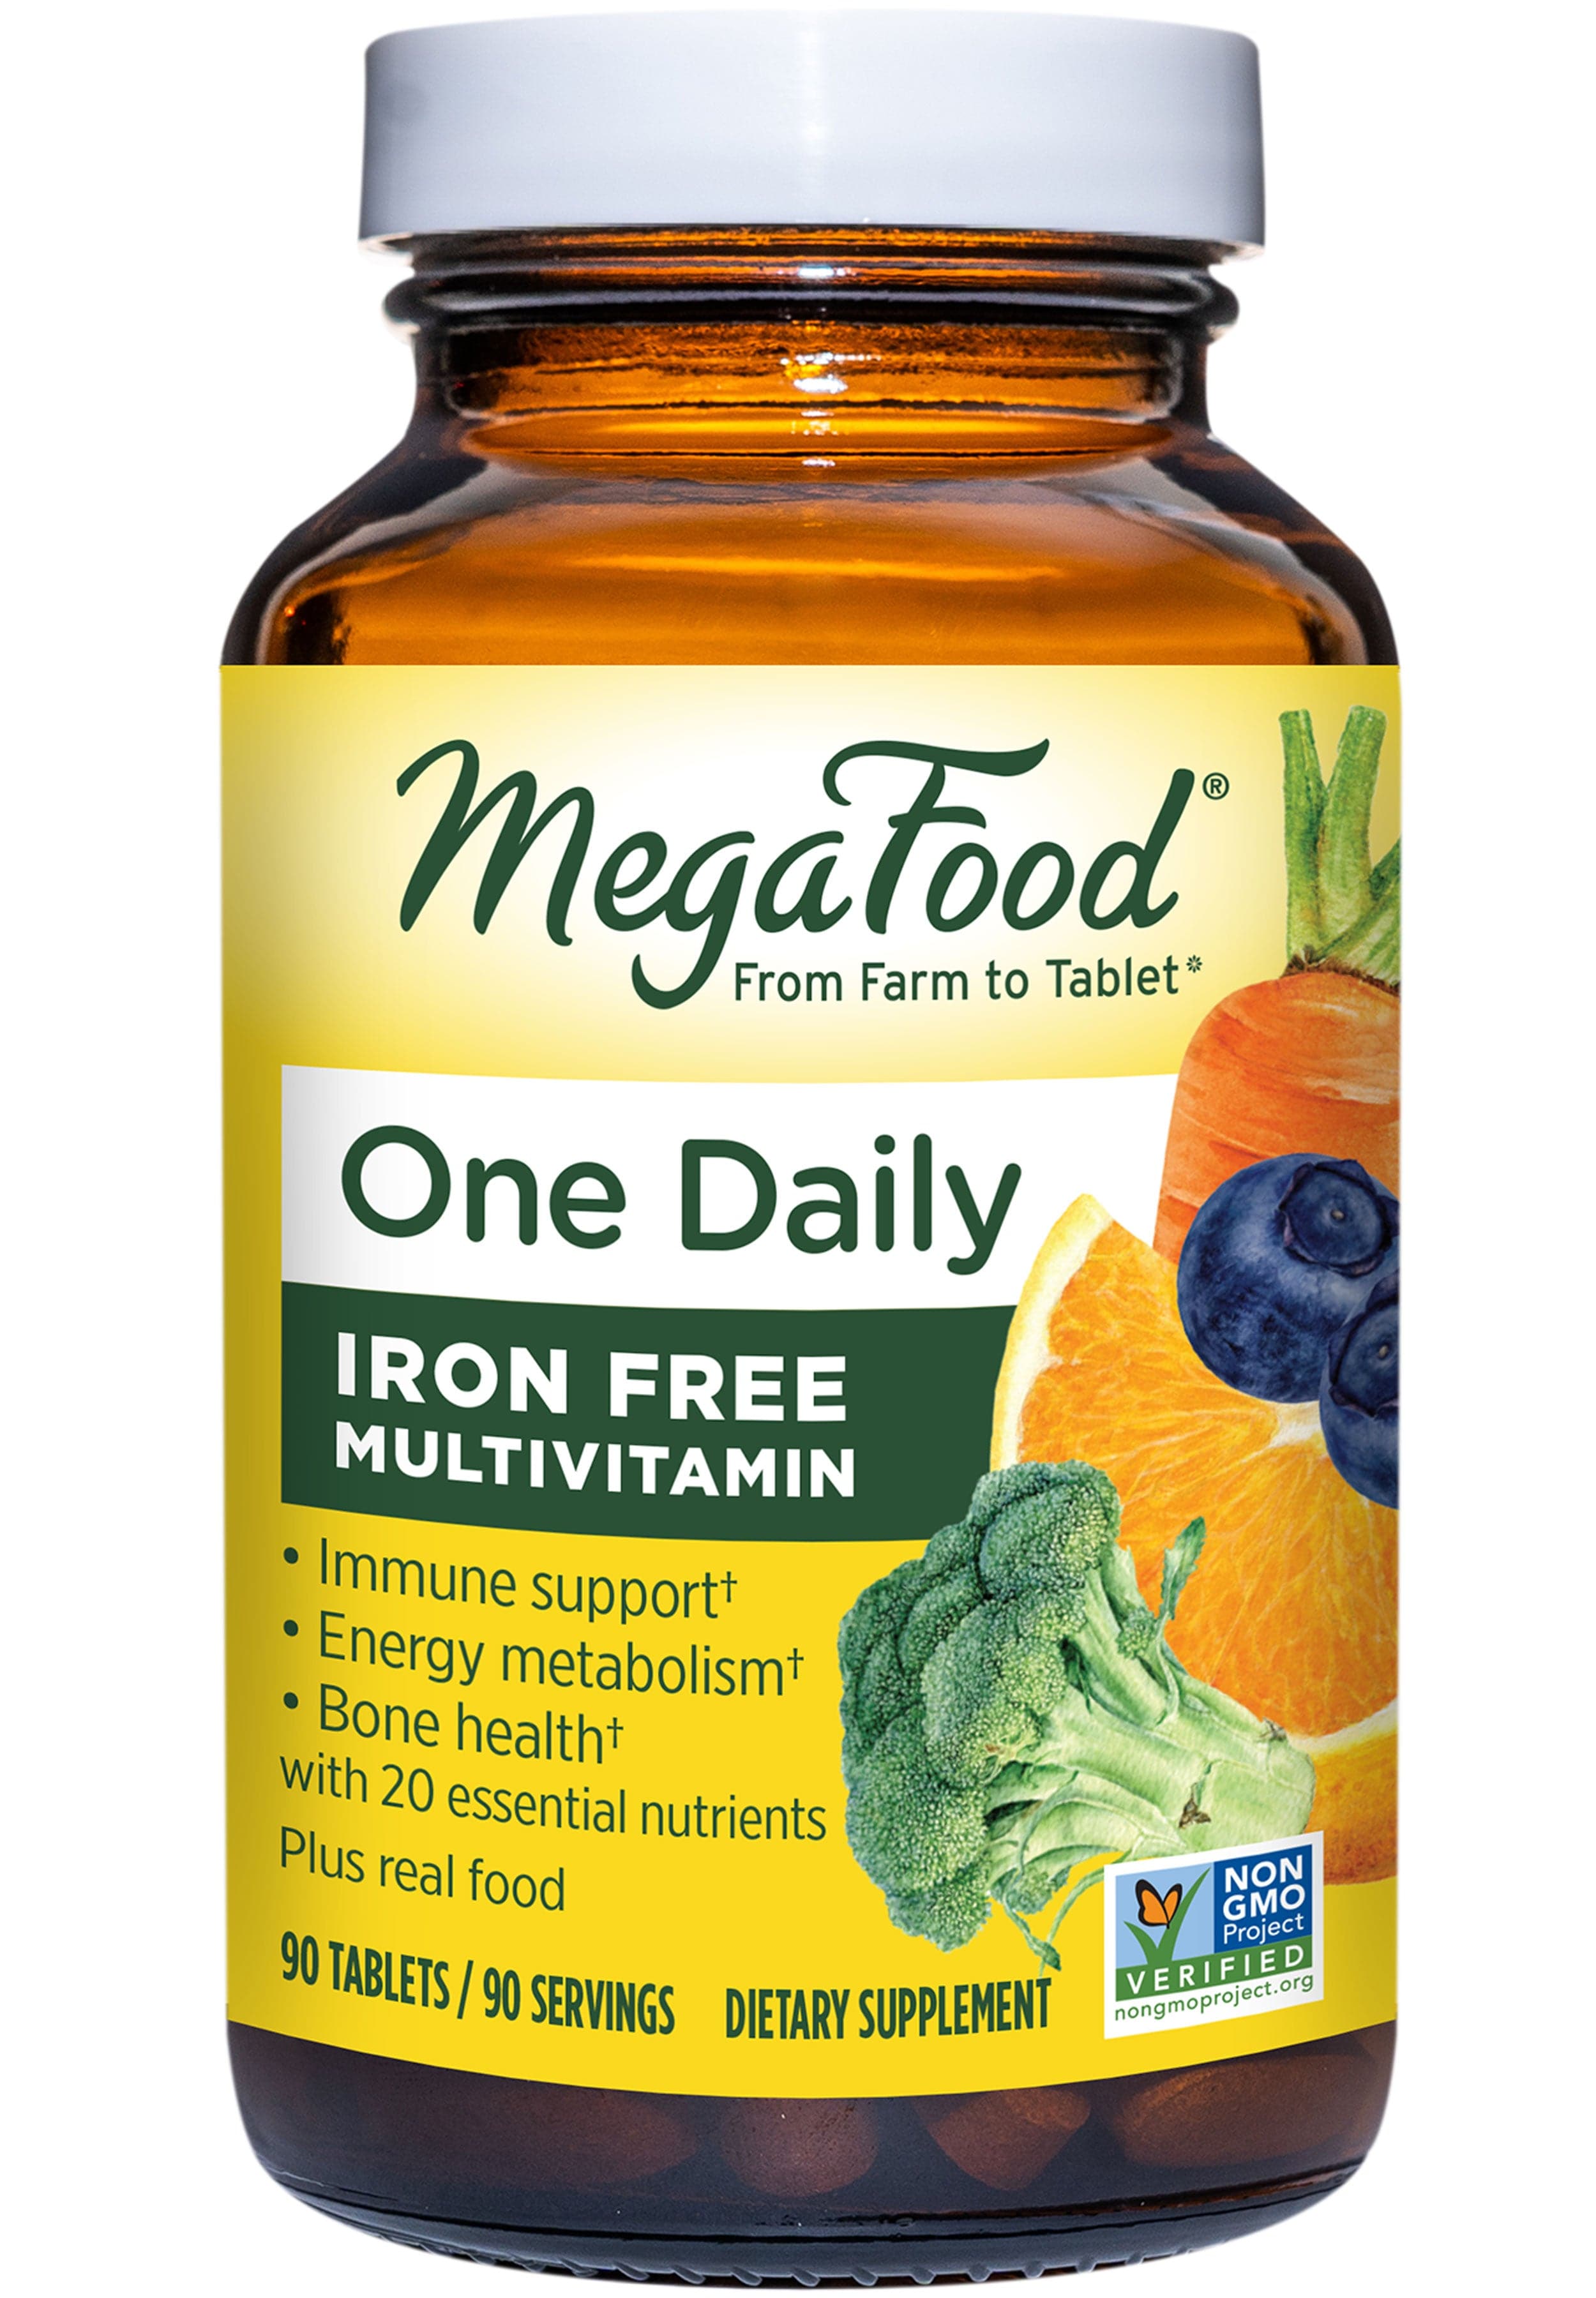 MegaFood One Daily Iron Free Multivitamin